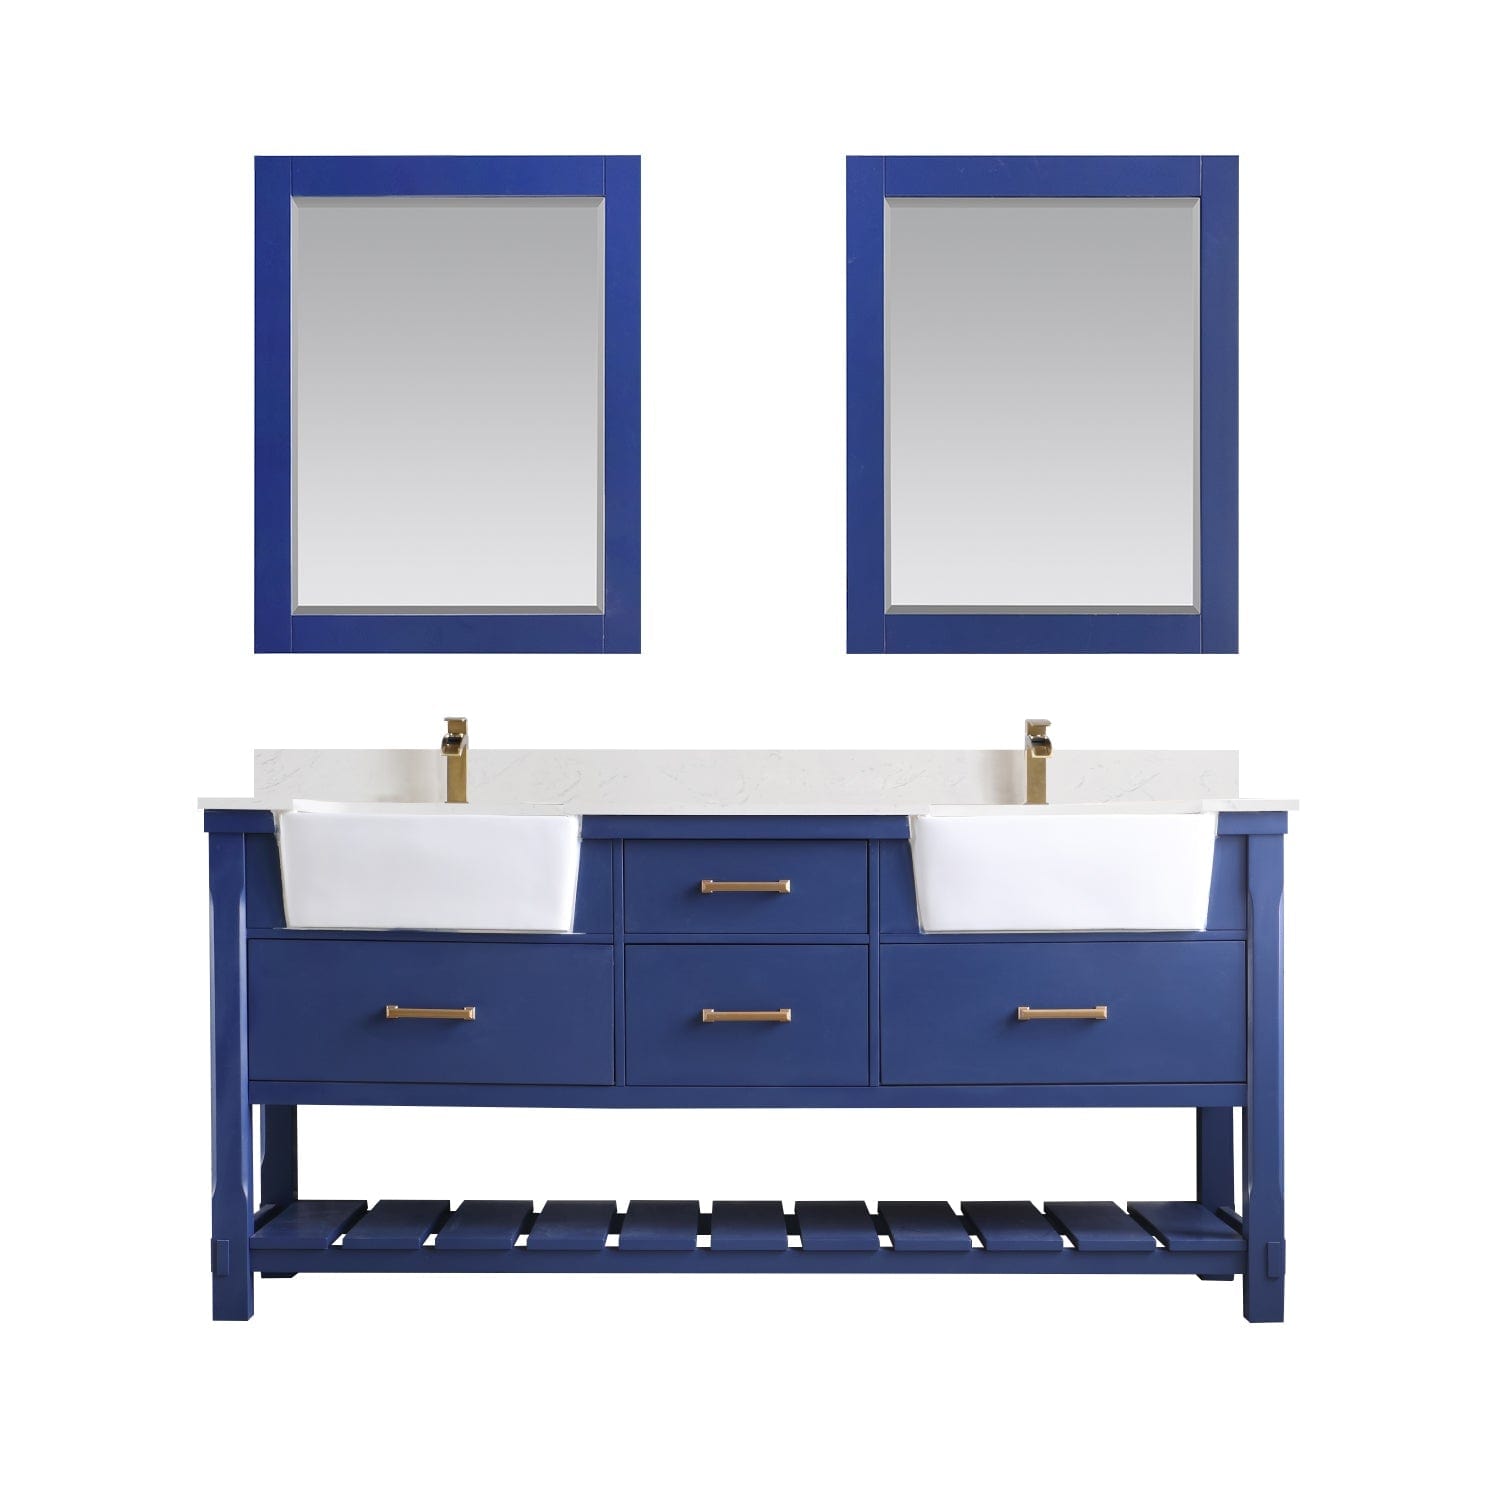 Altair Georgia 72" Double Bathroom Vanity Set in Jewelry Blue and Composite Carrara White Stone Top with White Farmhouse Basin with Mirror 537072-JB-AW - Molaix631112970679Vanity537072-JB-AW